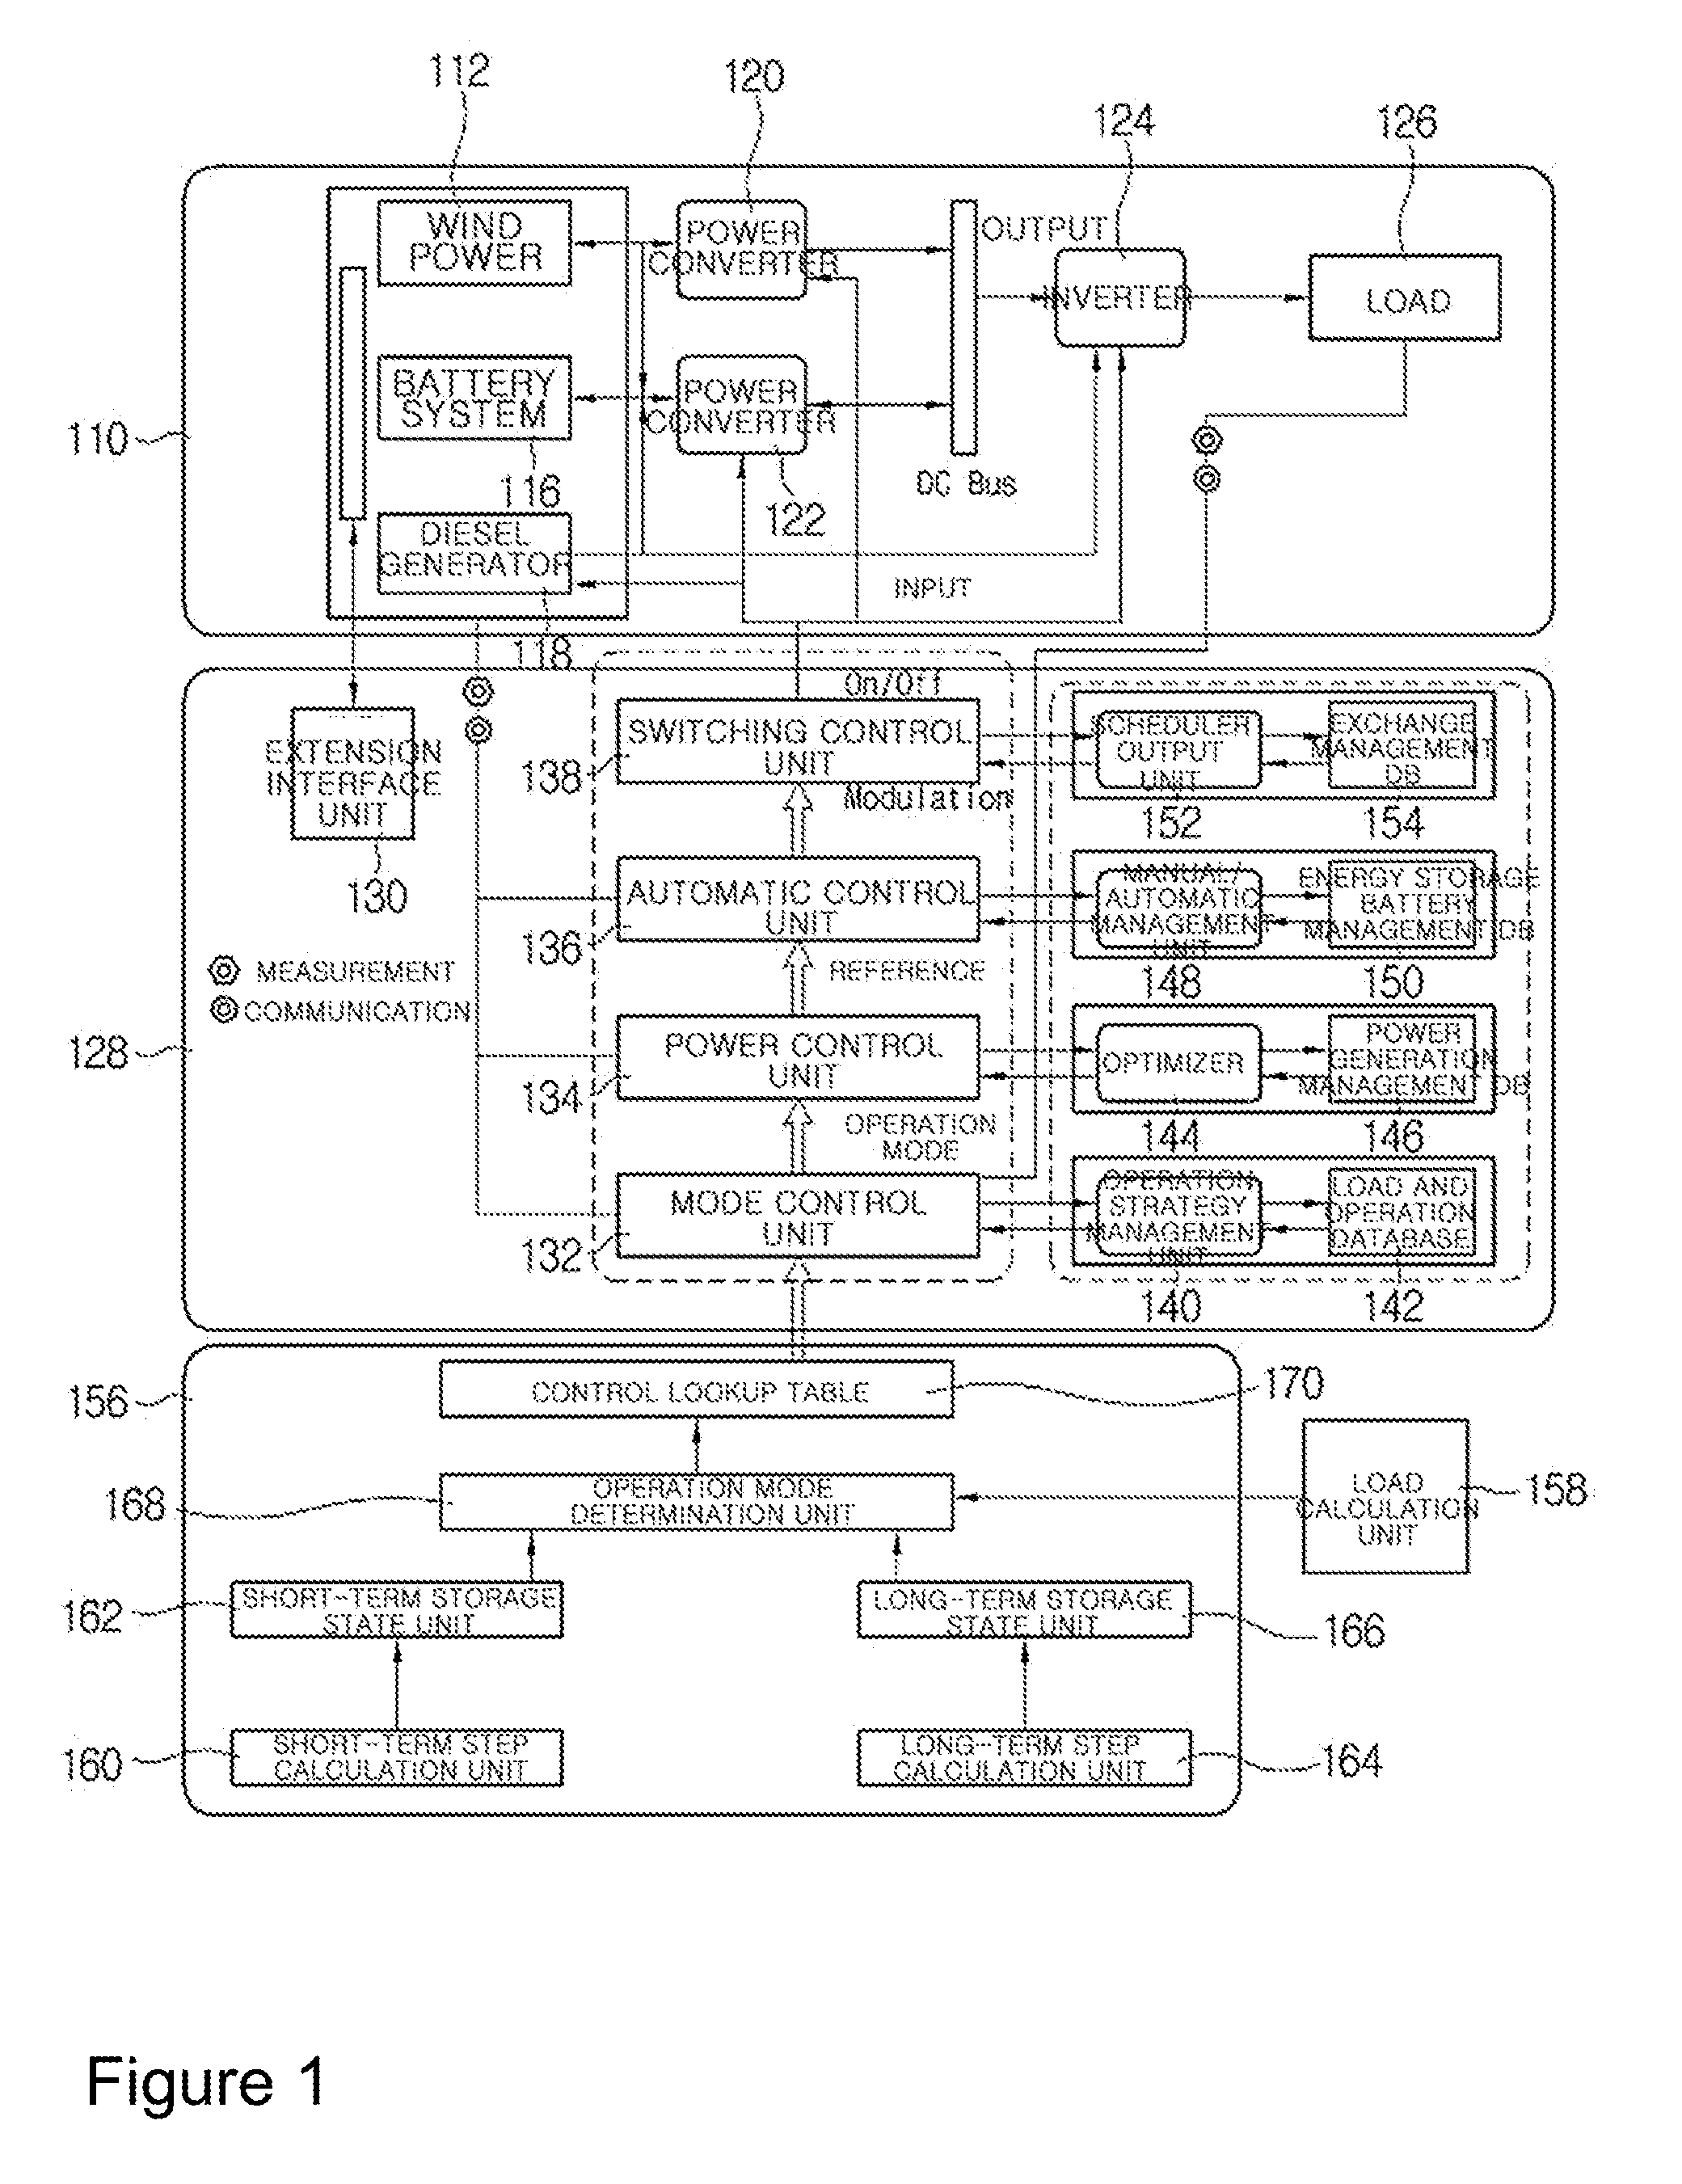 System and method for controlling micro-grid operation